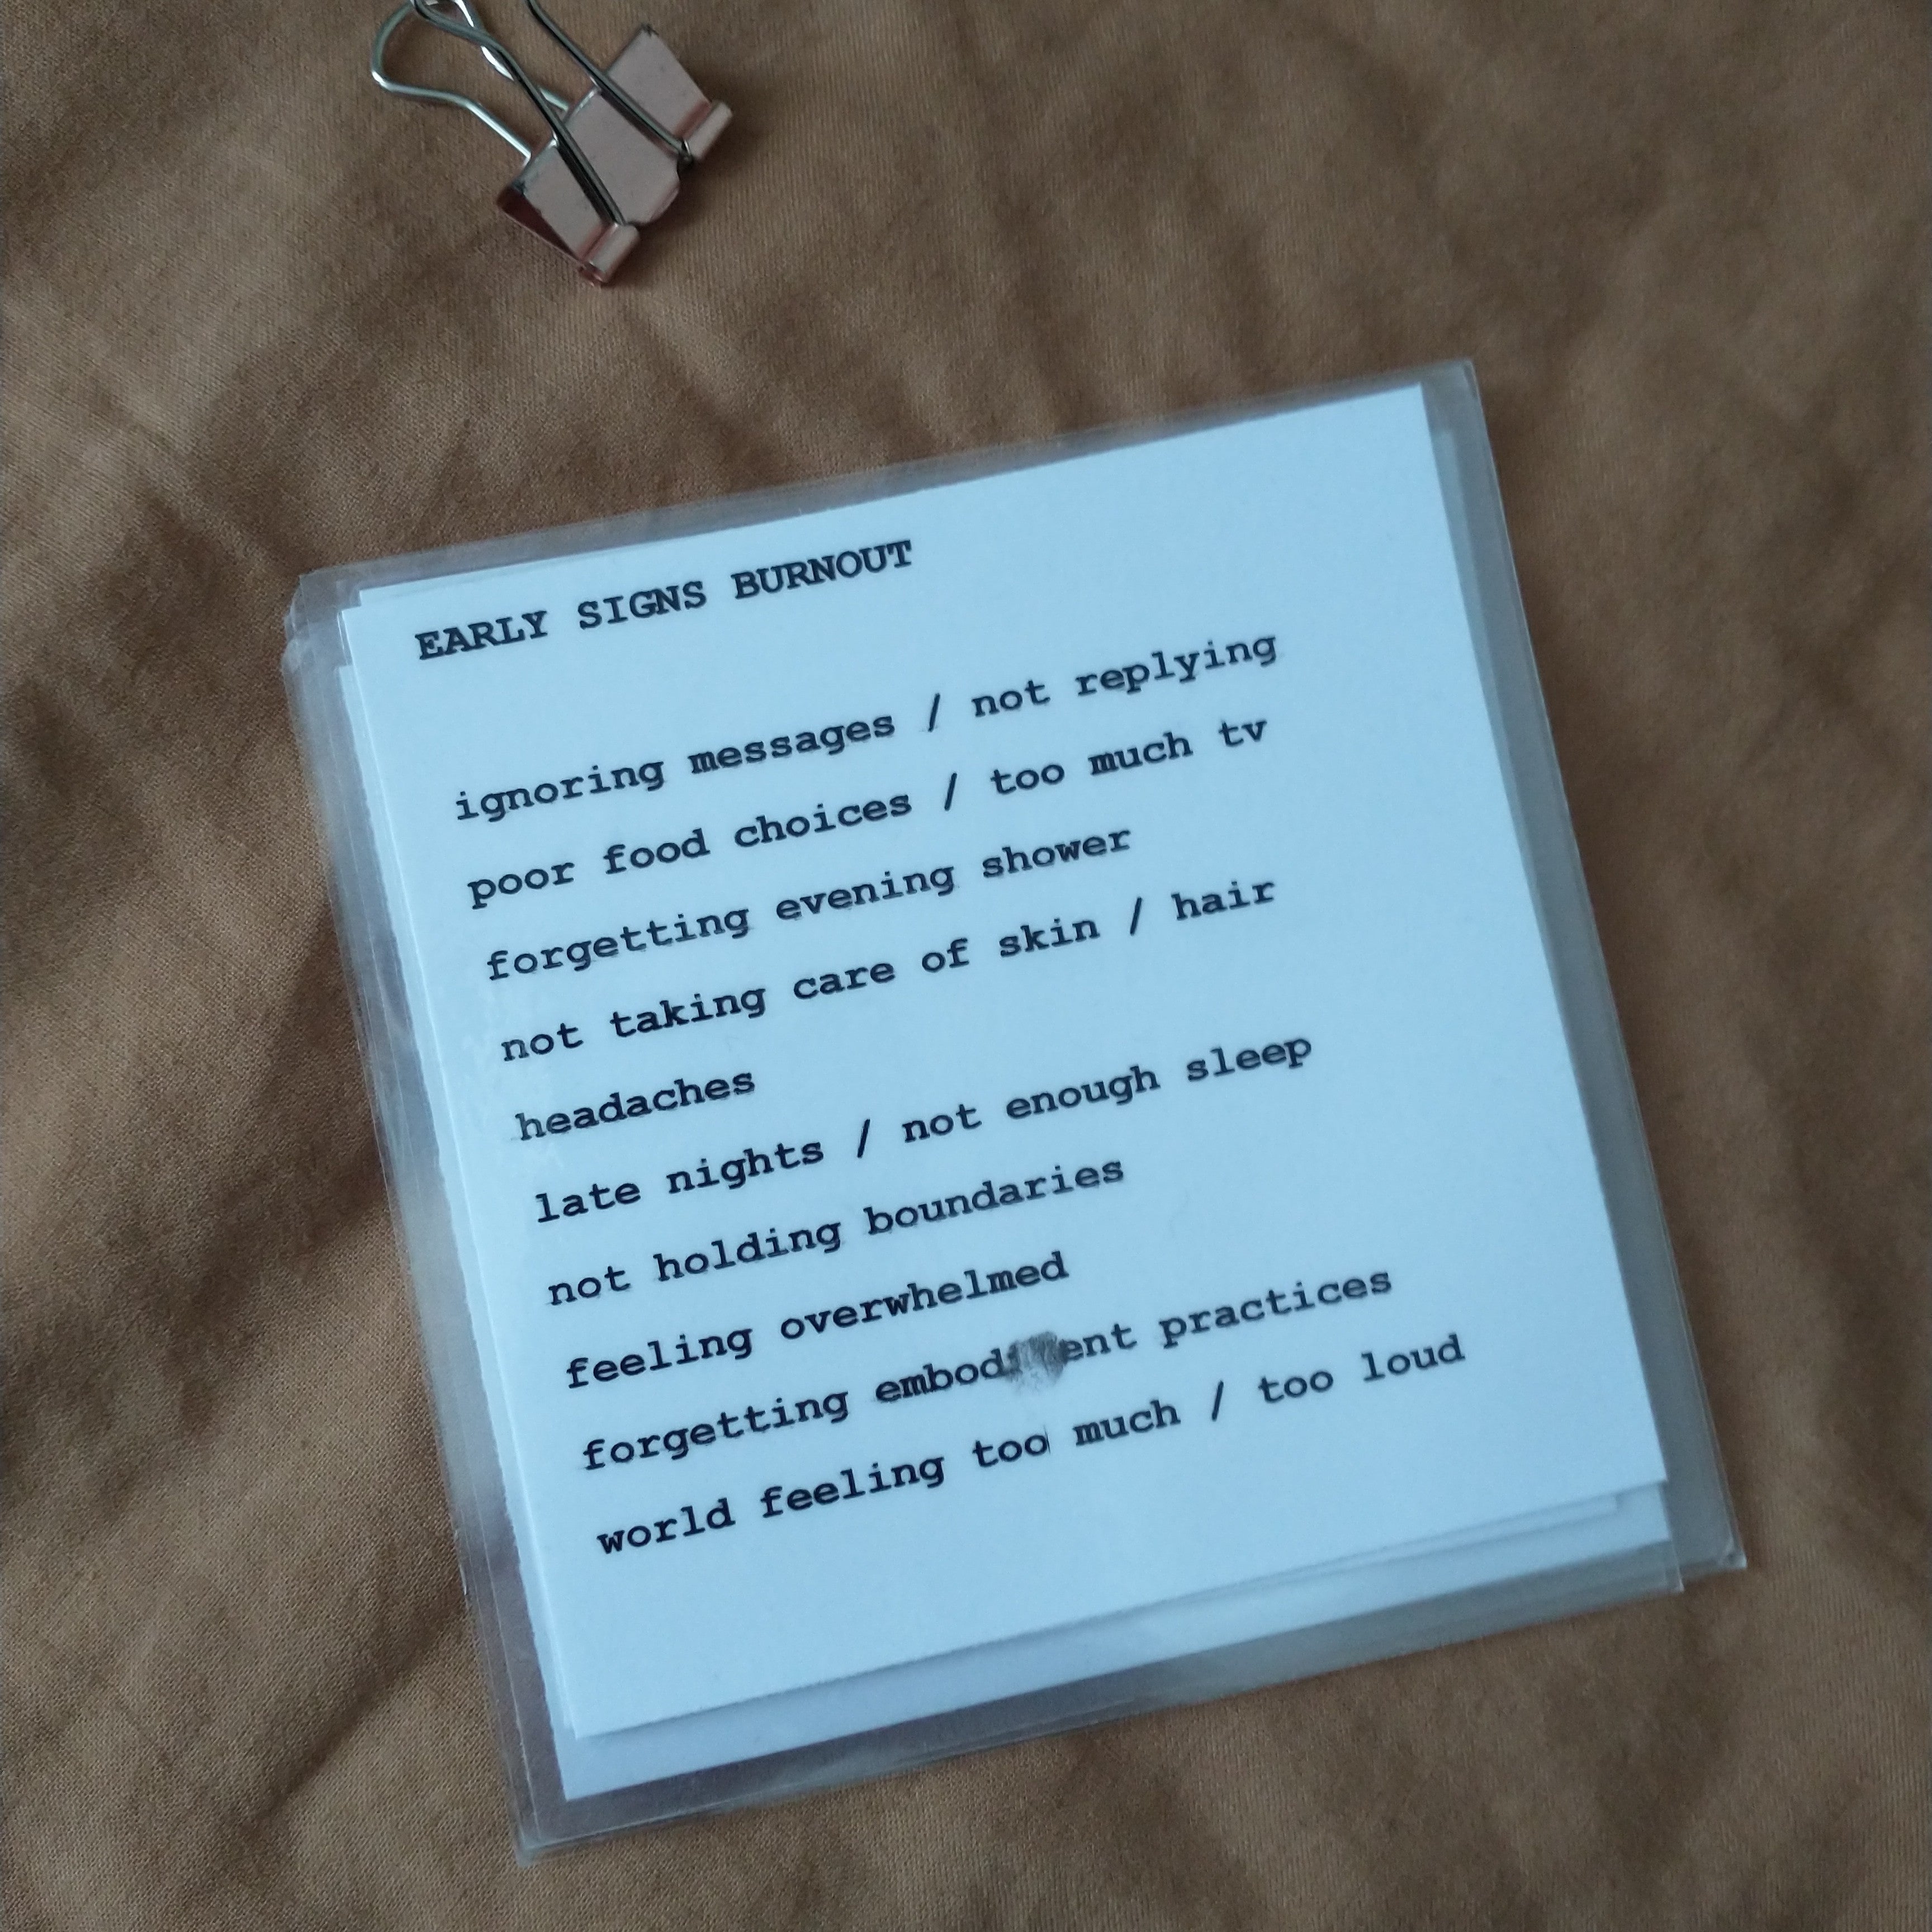 DIY self care prompt cards with typewriter style text show list of "Early Signs of Burnout"